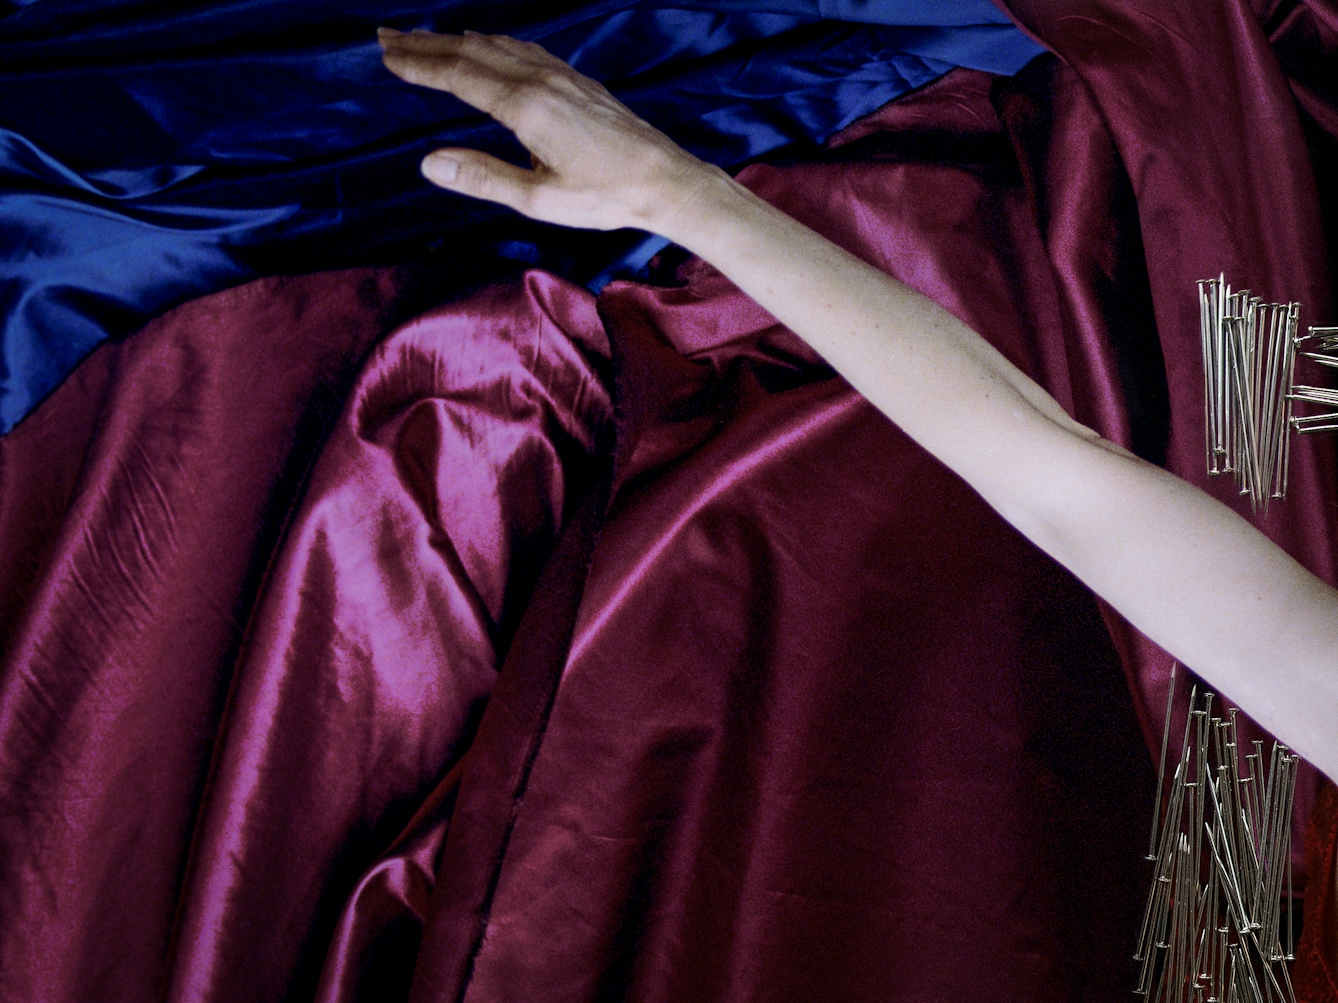 Detail from a larger artwork created with a colour photographic print of a female figure in a bright red dress, set against a purple and blue draped silk background. Her arm is extended out to the side, hand stretched out. Just visible is one side of the pin frame which stops above and below her extended arm making it look as if she is bursting through the frame.